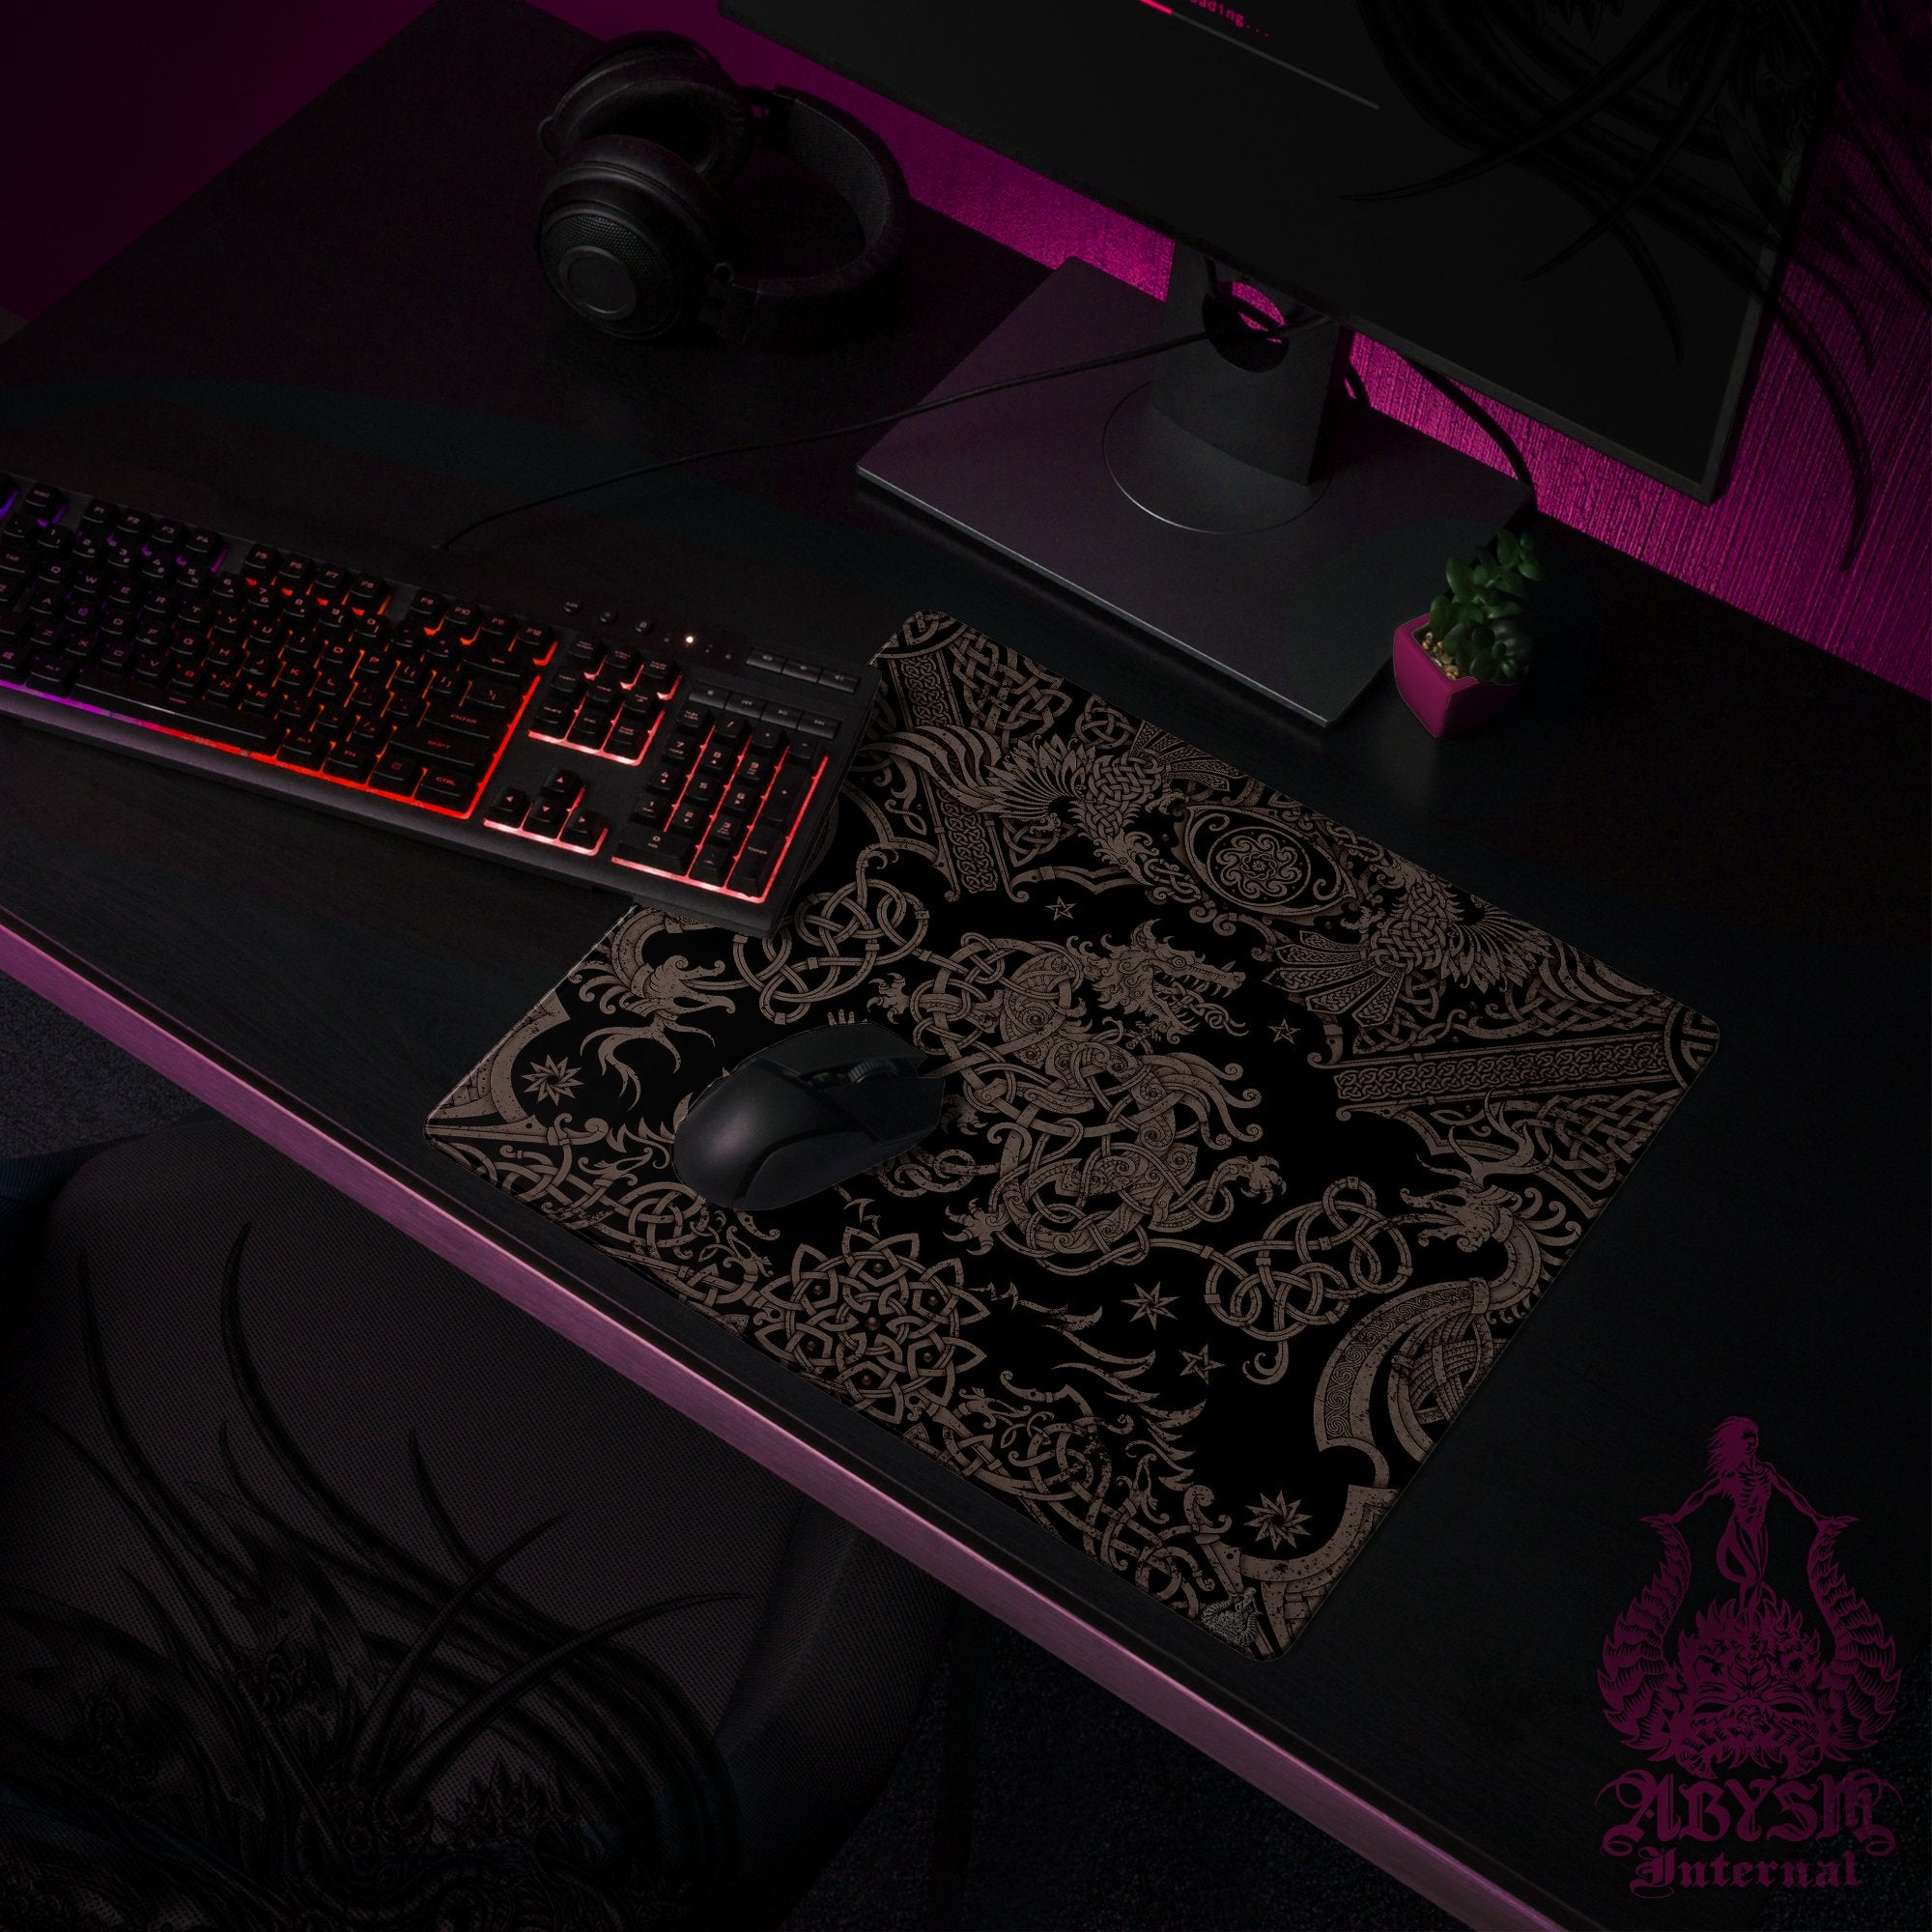 Fenrir Gaming Mouse Pad, Viking Desk Mat, Nordic Wolf Table Protector Cover, Norse Knotwork Workpad, Art Print - Black Grey Grit - Abysm Internal